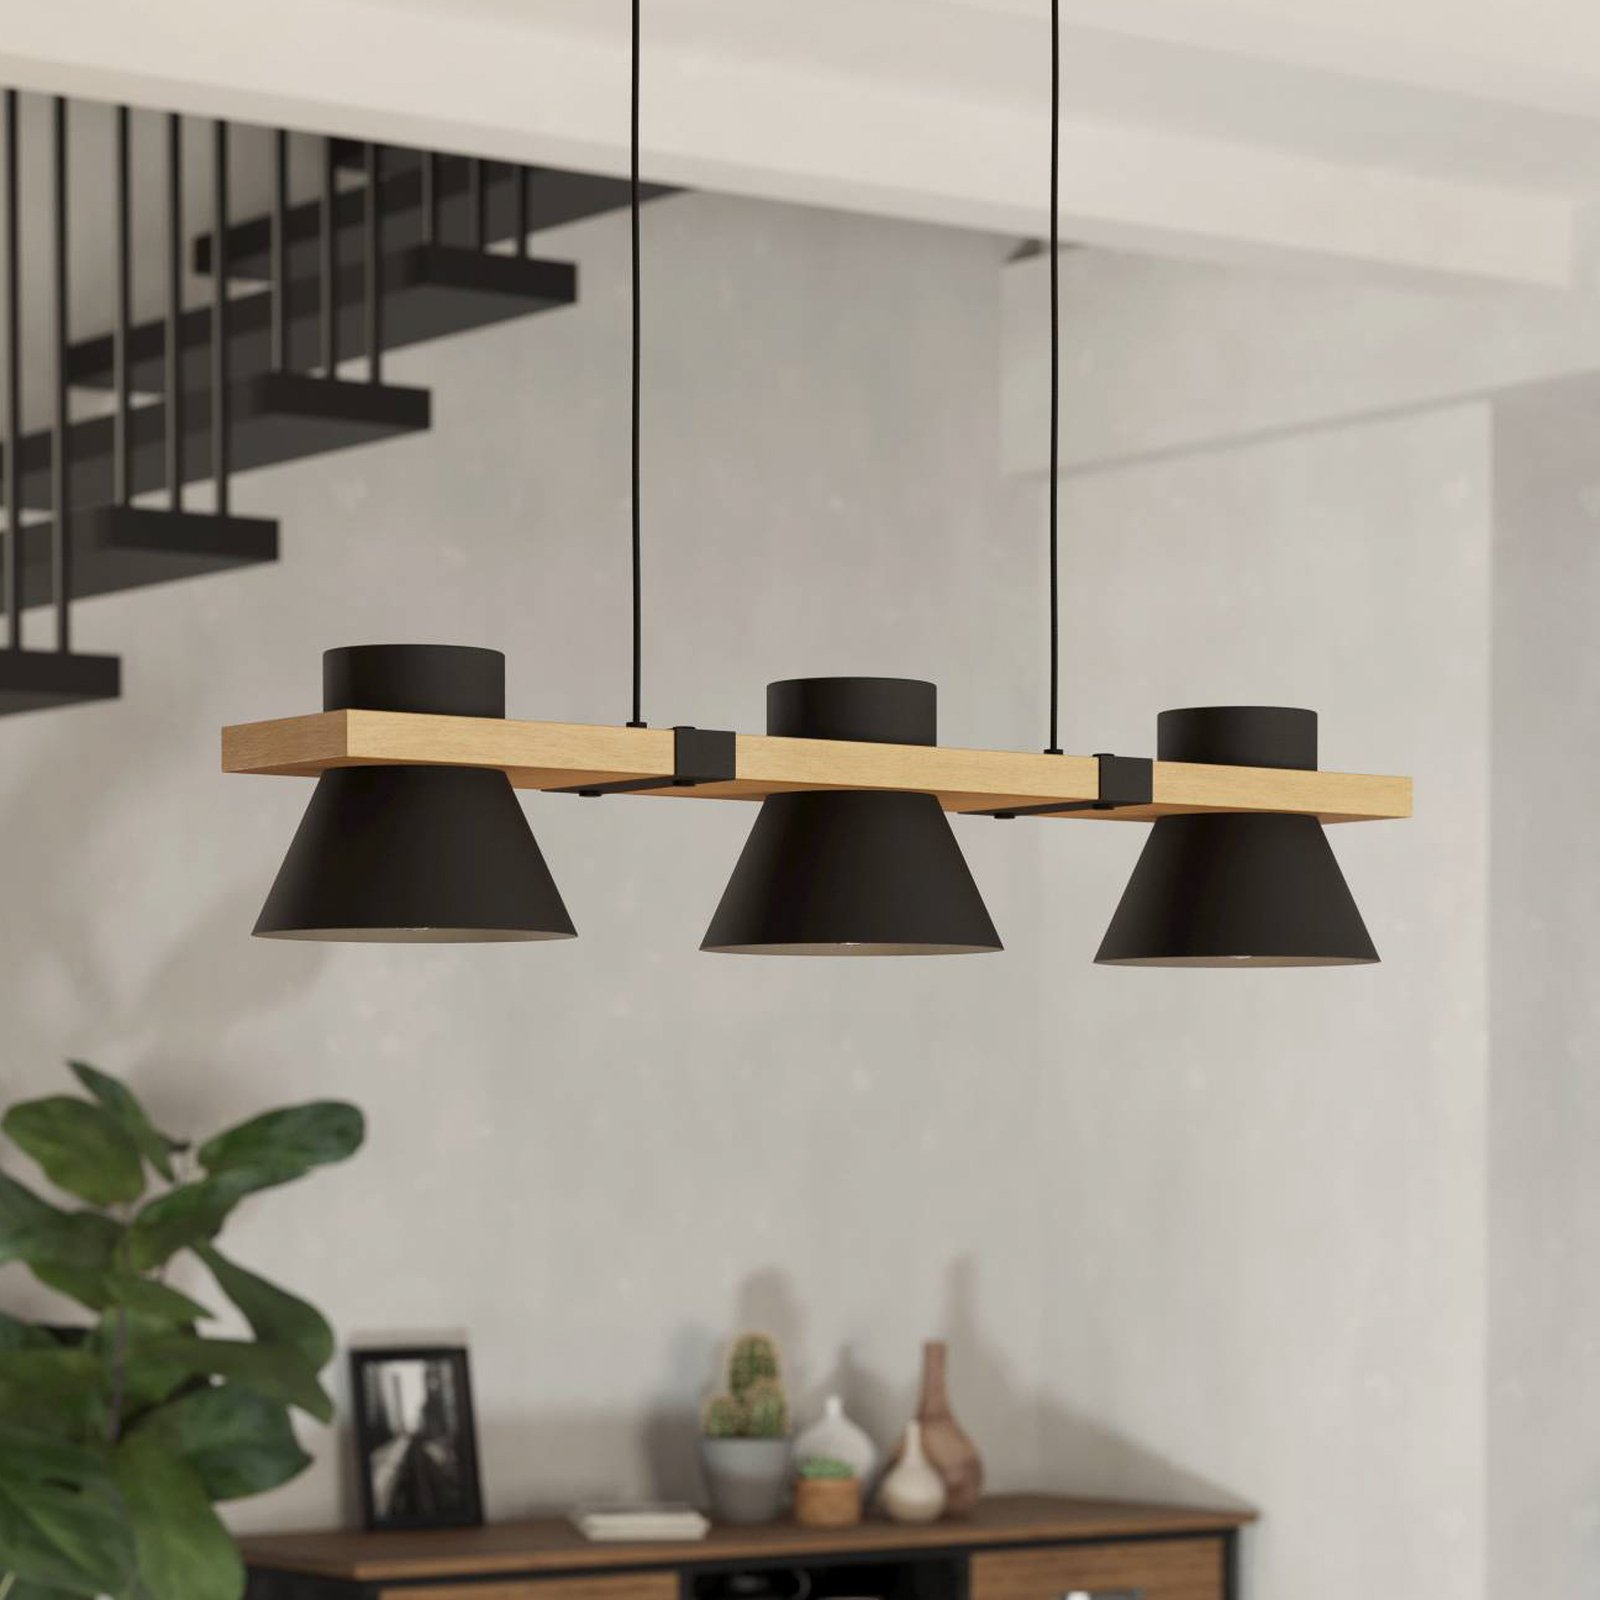 Maccles pendant light in black with wood, 3-bulb